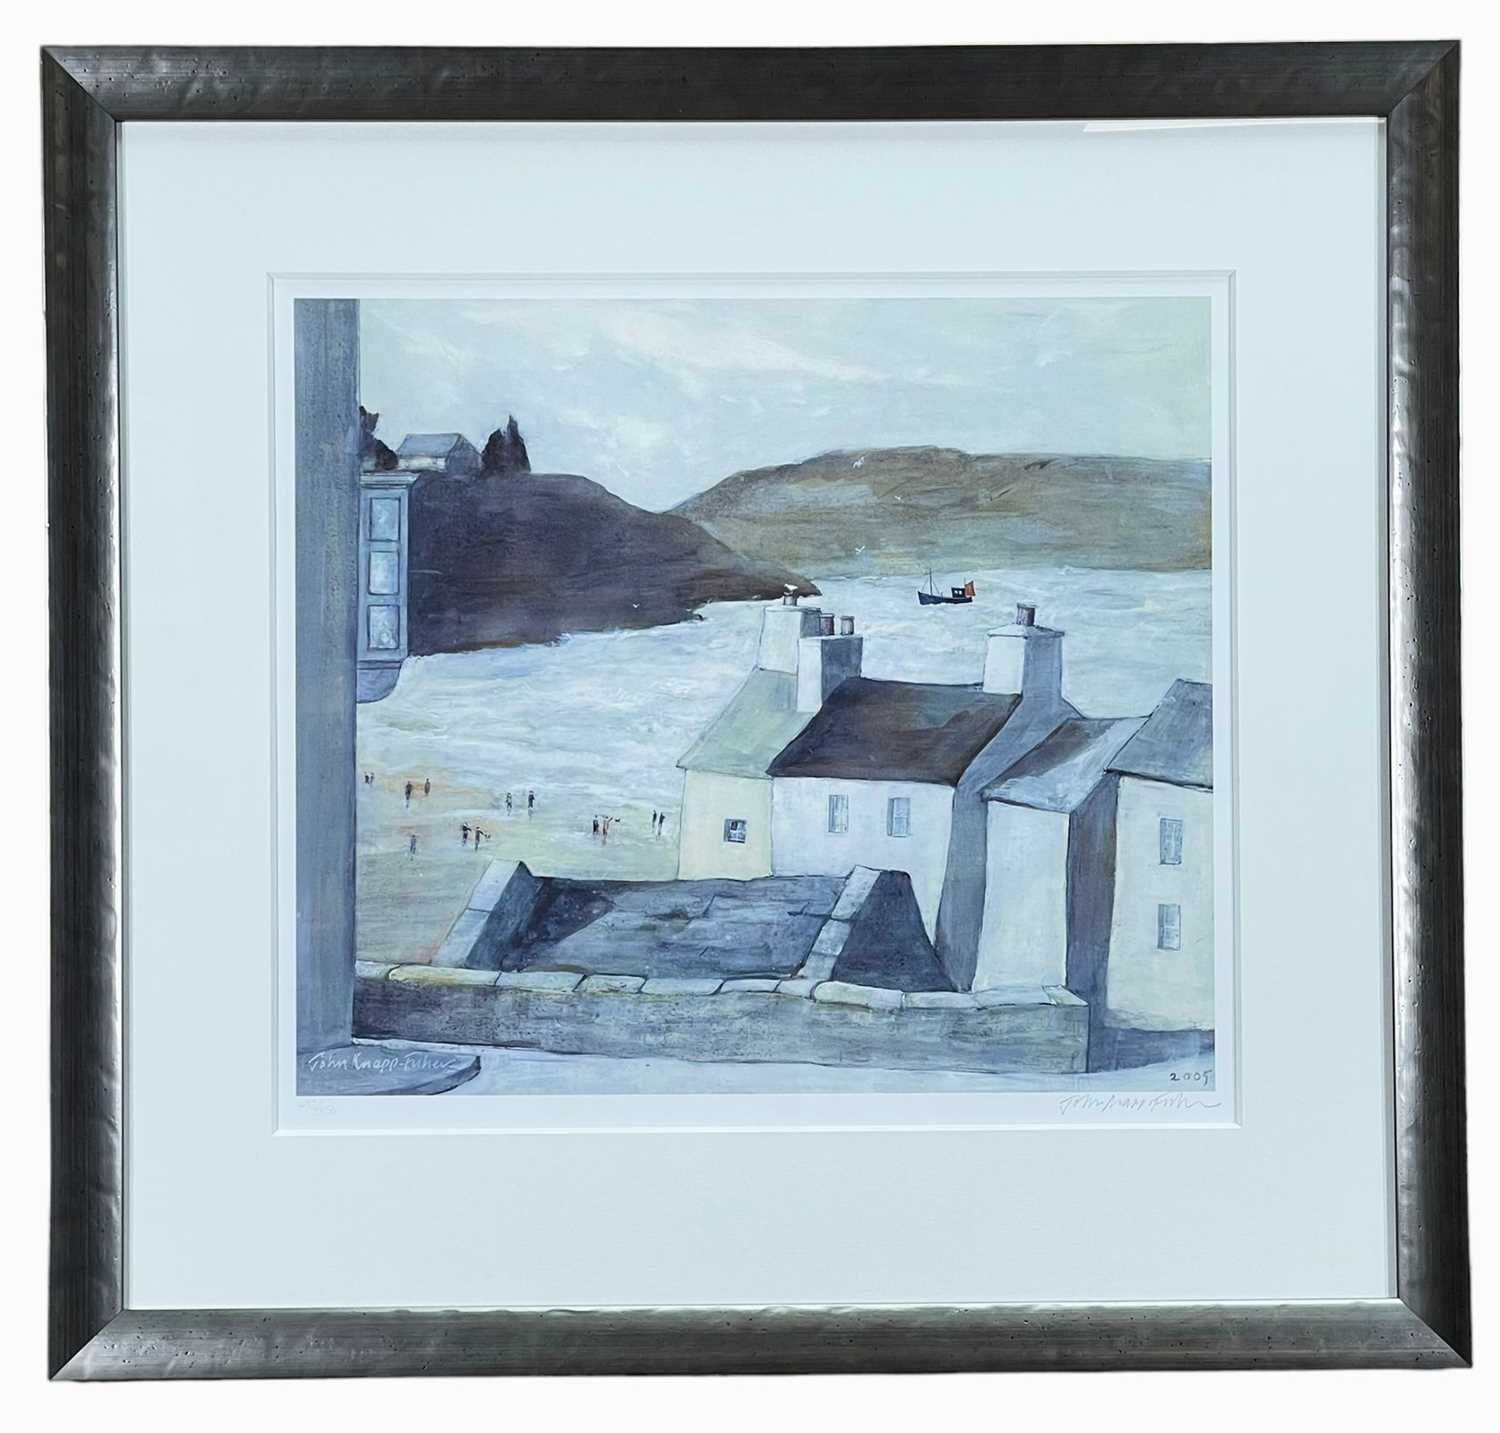 ‡ JOHN KNAPP-FISHER - limited edition (492/850) print - Tenby with buildings and North Beach, signed - Image 2 of 2